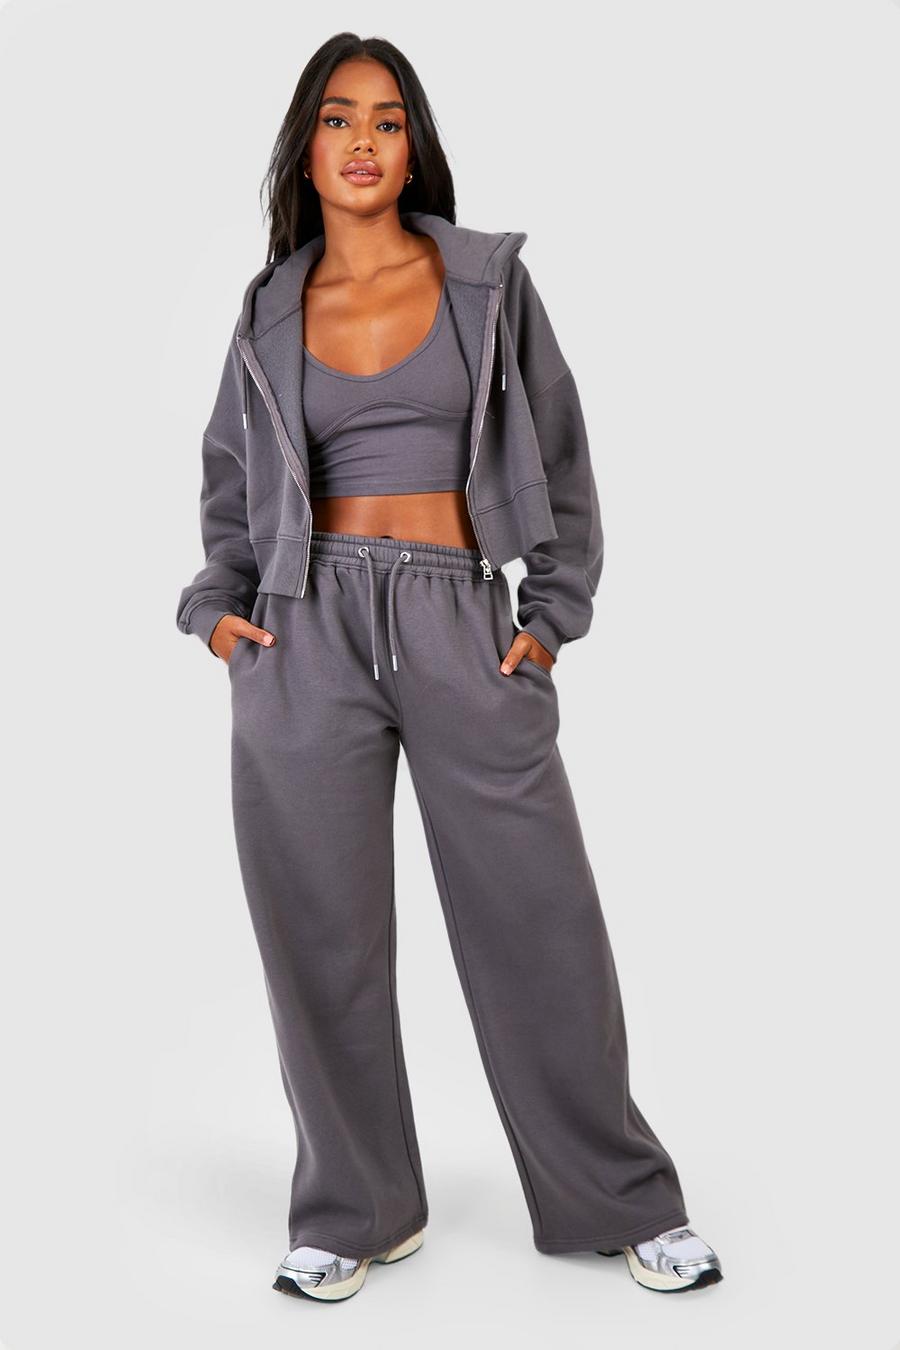 Charcoal Seam Detail Crop Top 3 Piece Hooded Tracksuit